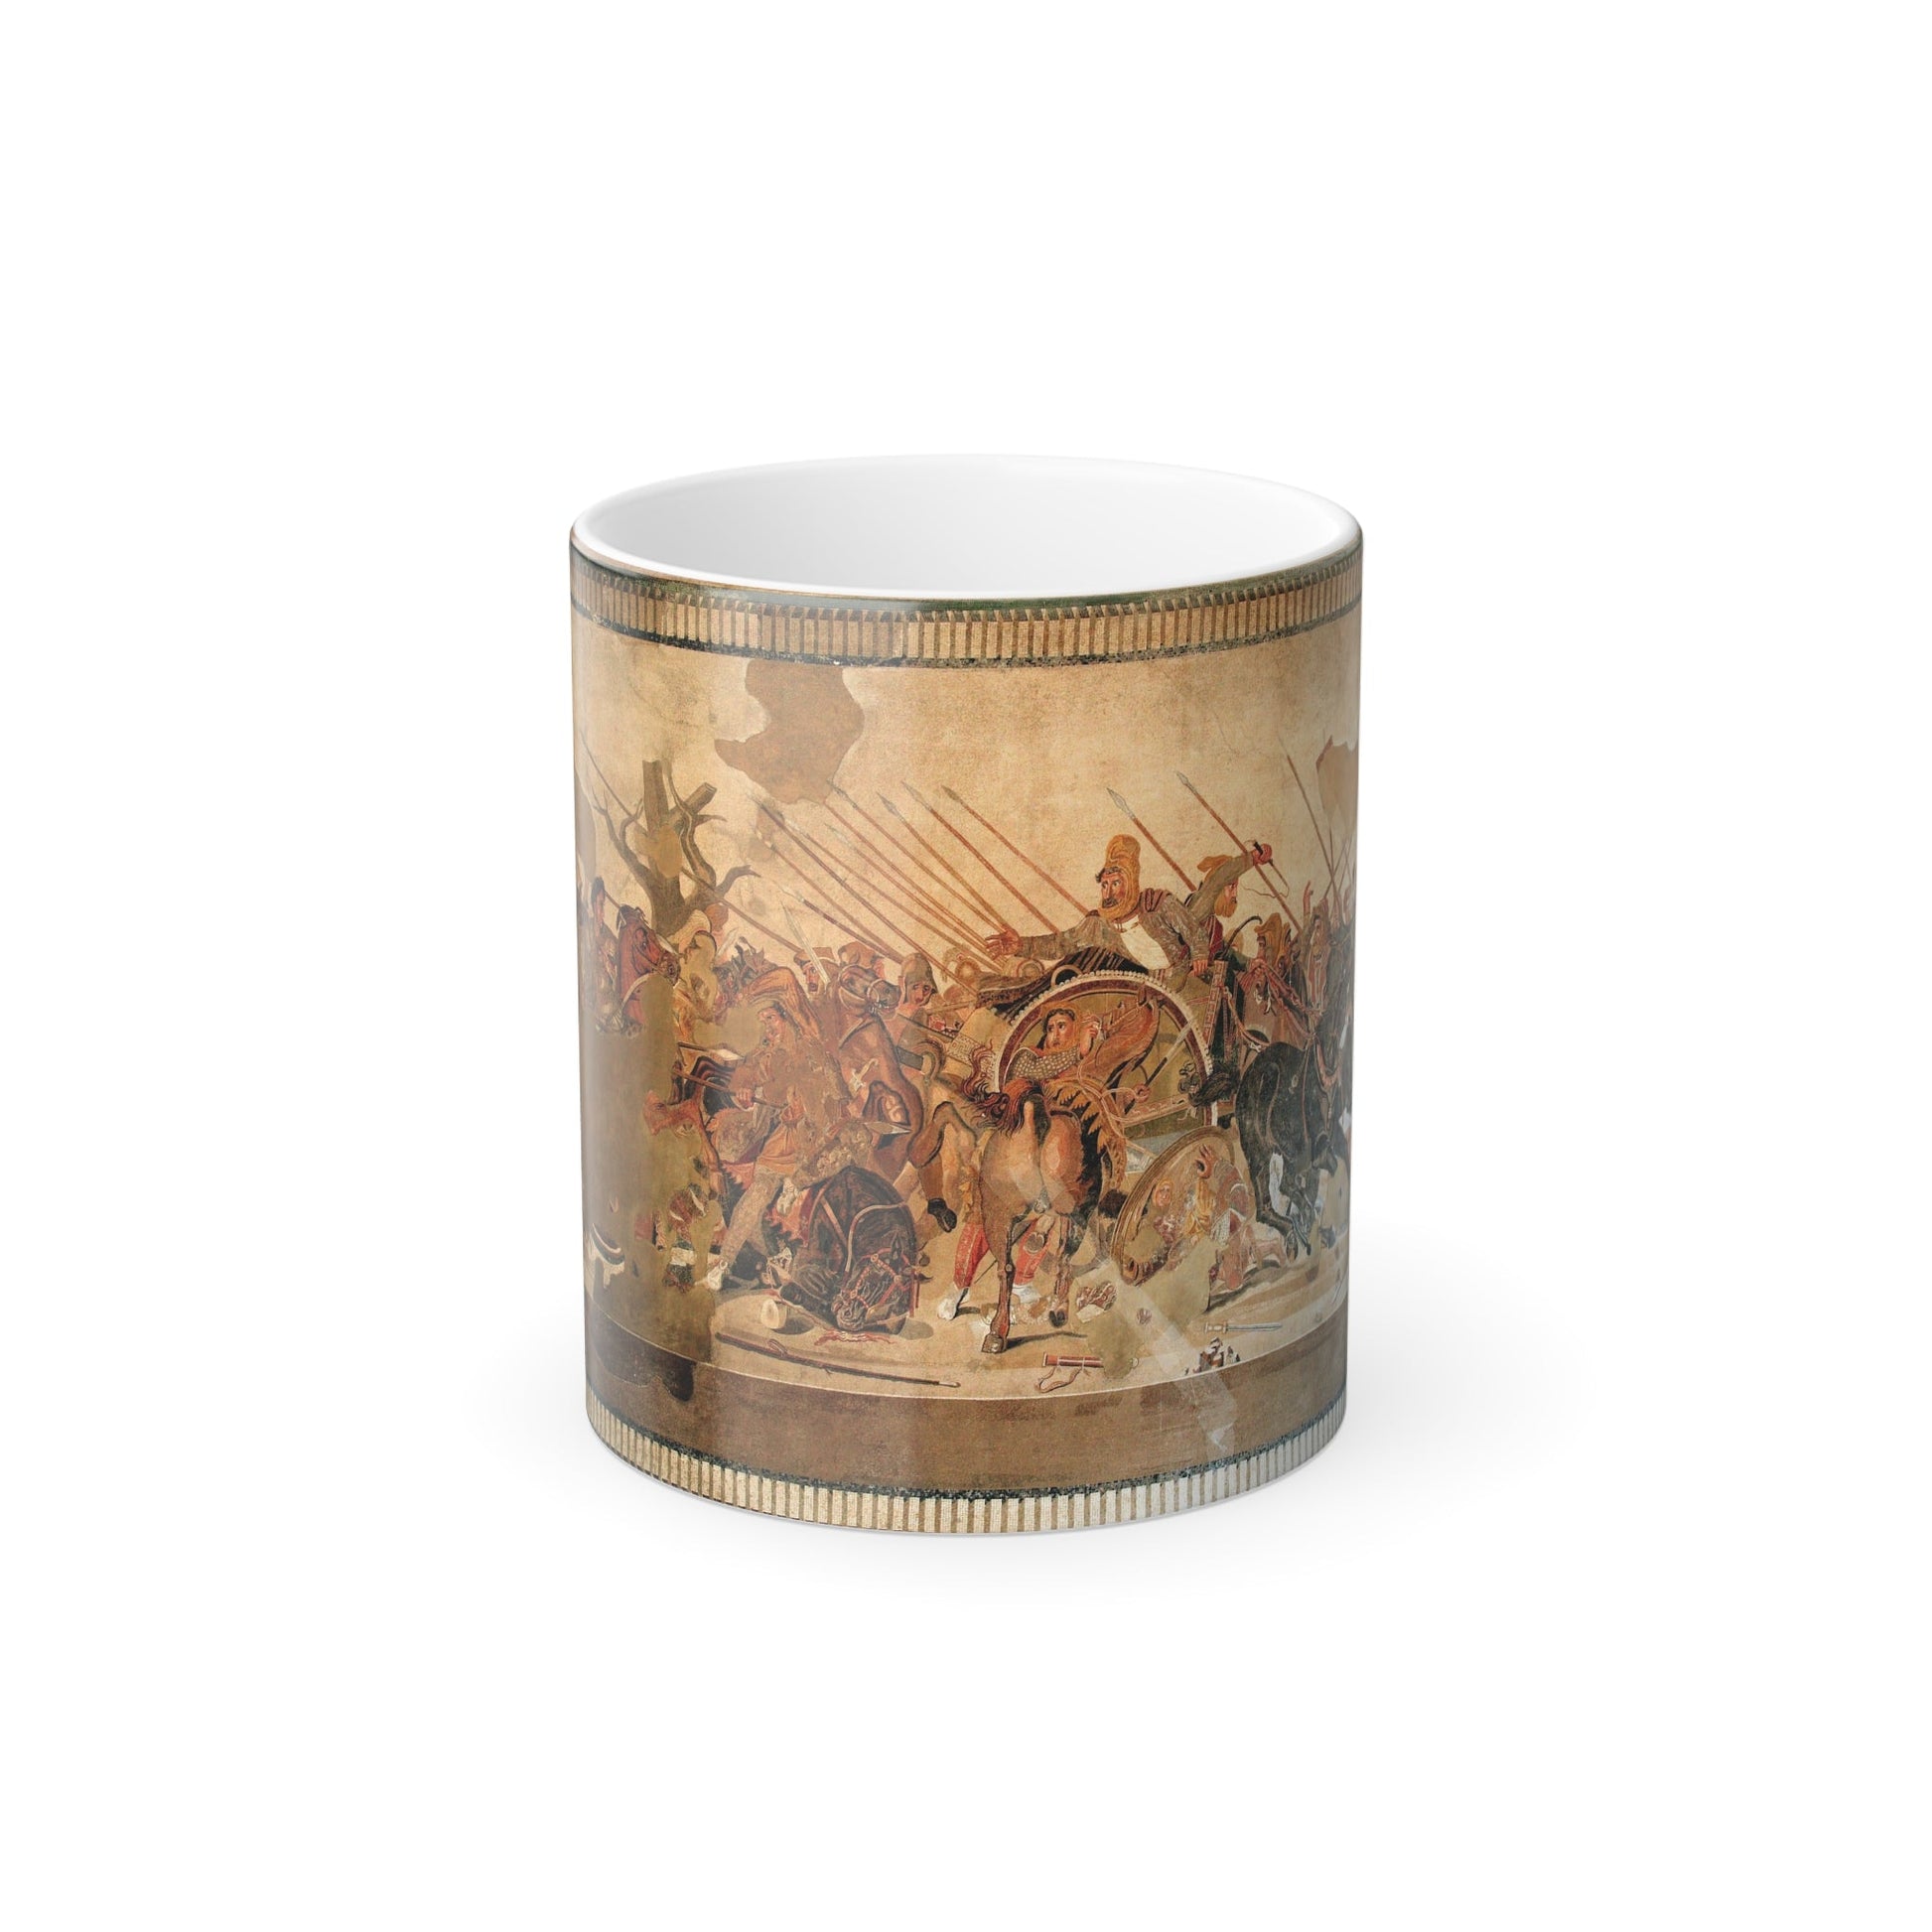 Alexander mosaic - House of the Faun, Pompeii - Color Changing Mug 11oz-11oz-The Sticker Space